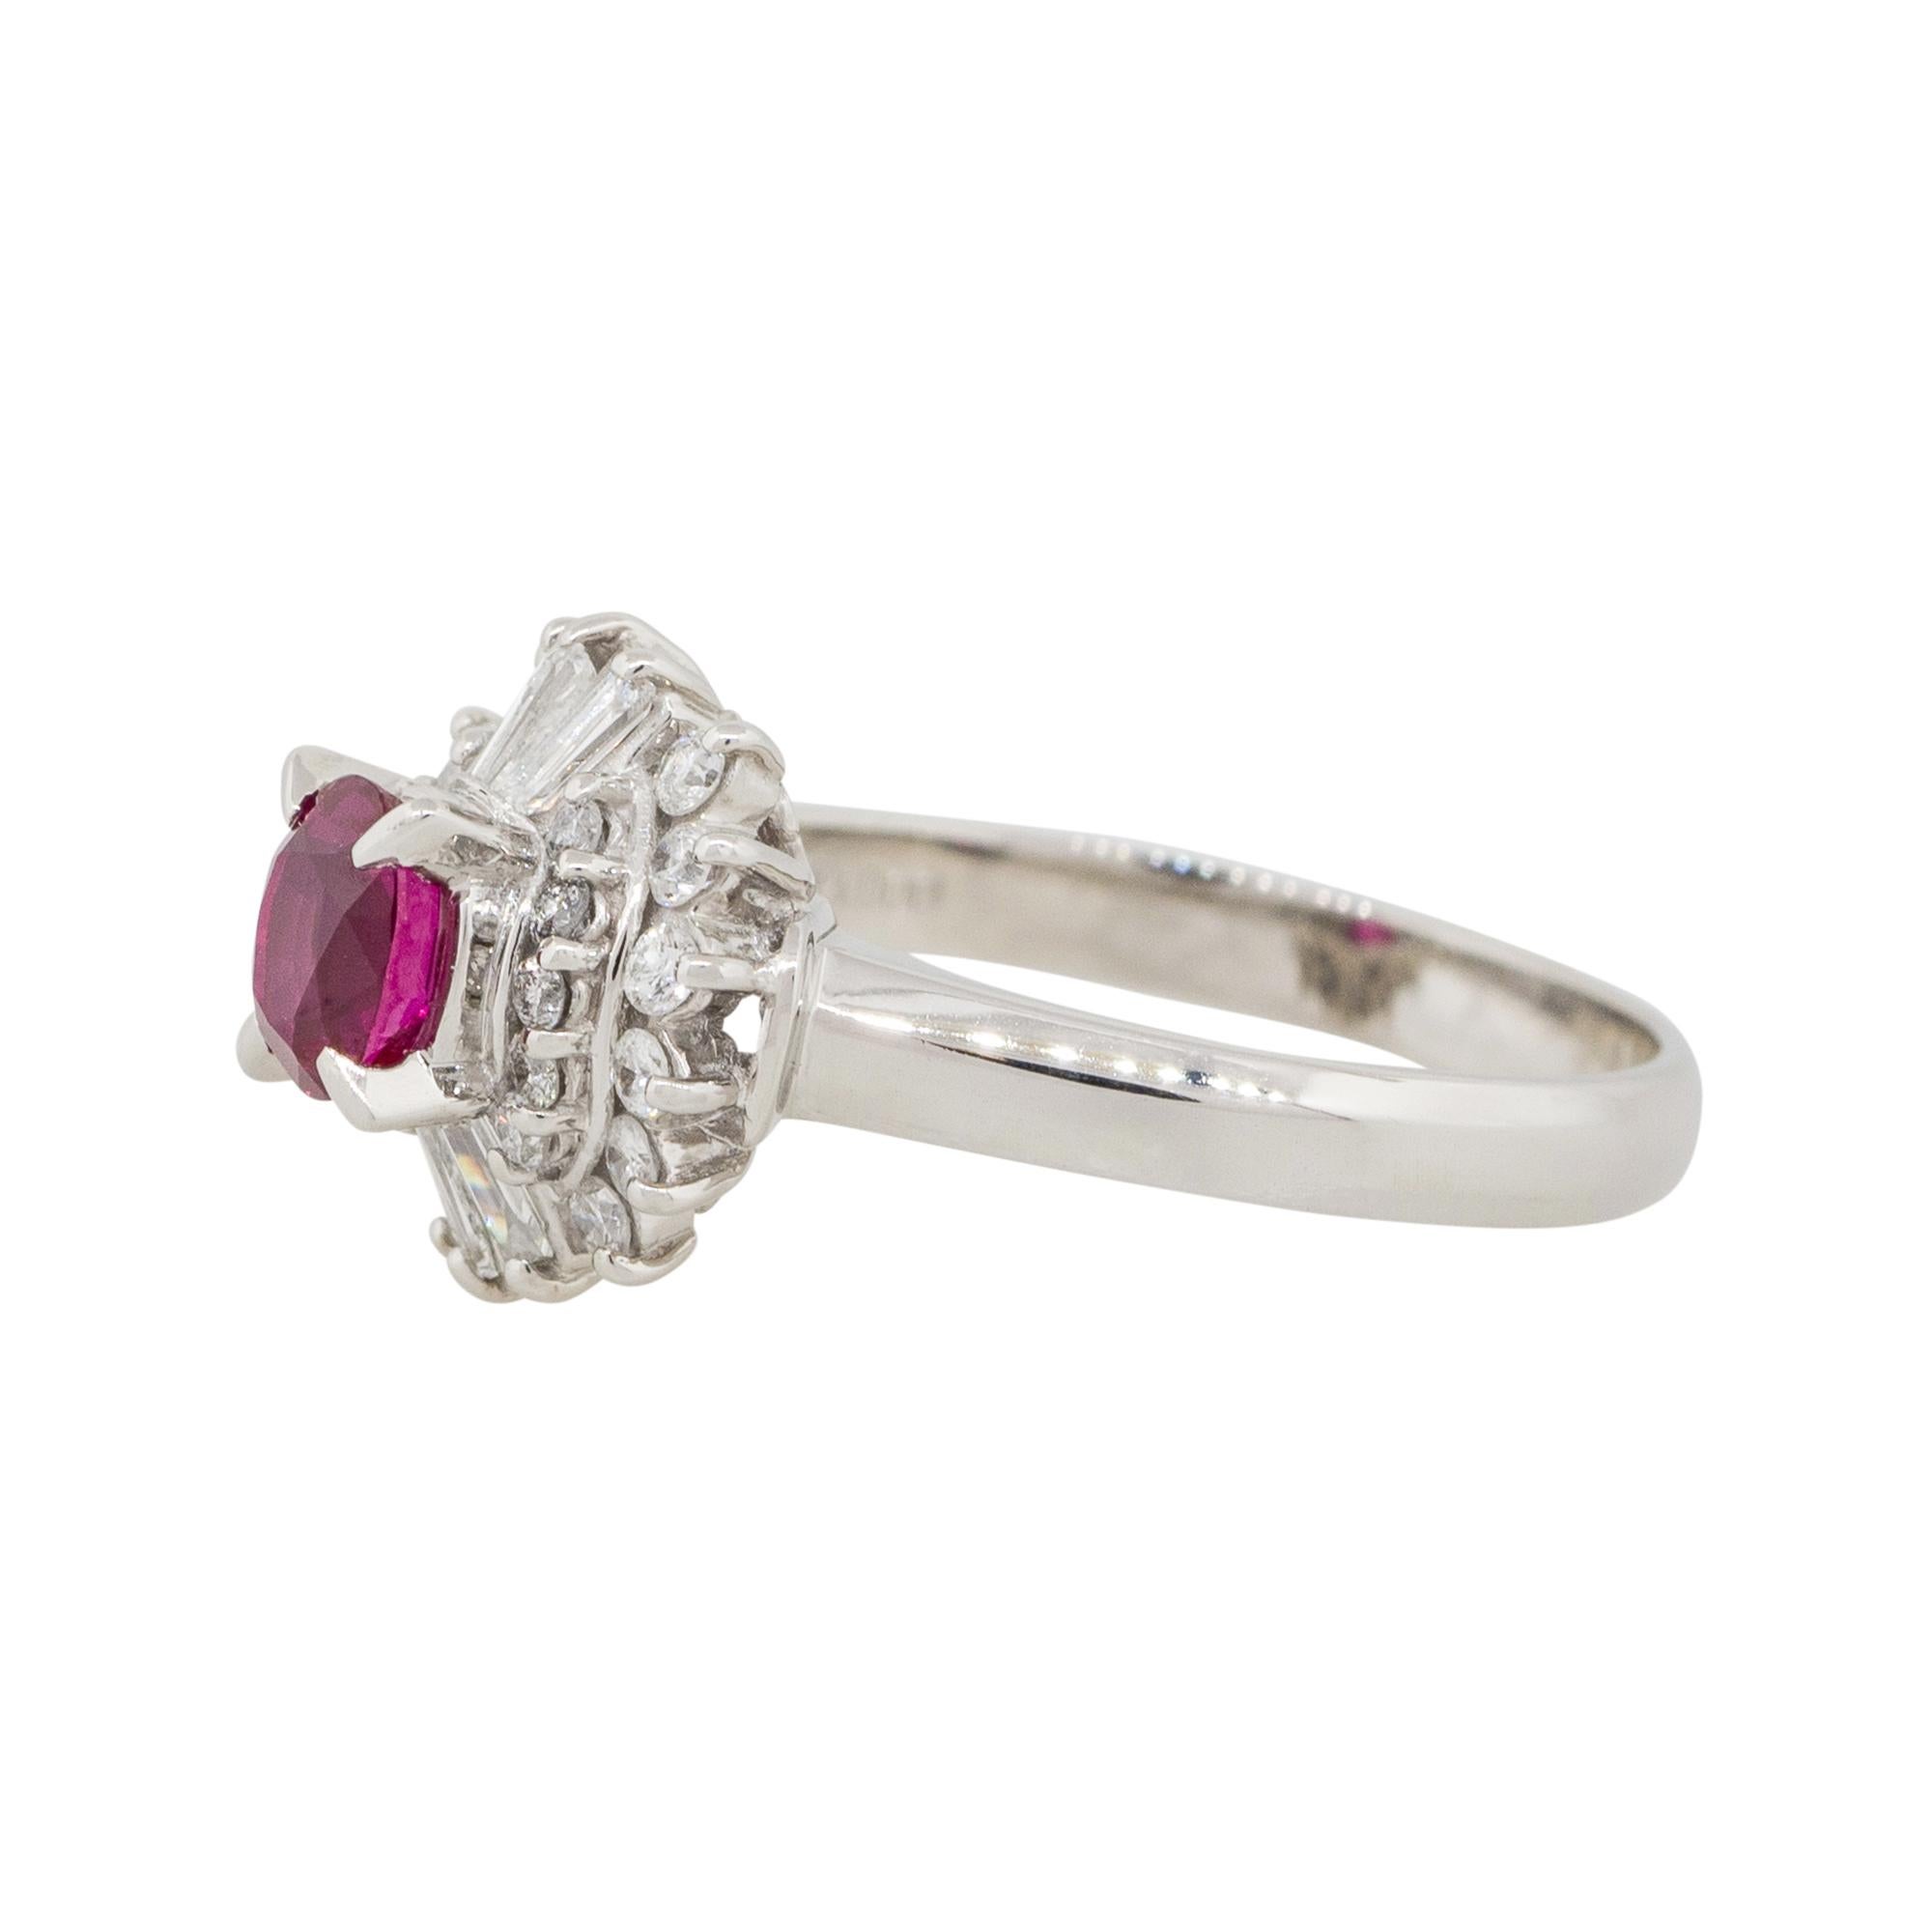 Material: Platinum
Gemstone details: Approx. 0.72ctw oval shaped Ruby center gemstone
Diamond details: Approx. 0.41ctw of round and baguette cut Diamonds. Diamonds are G/H in color and VS in clarity
Ring Size: 6.25   
Ring Measurements: 0.75